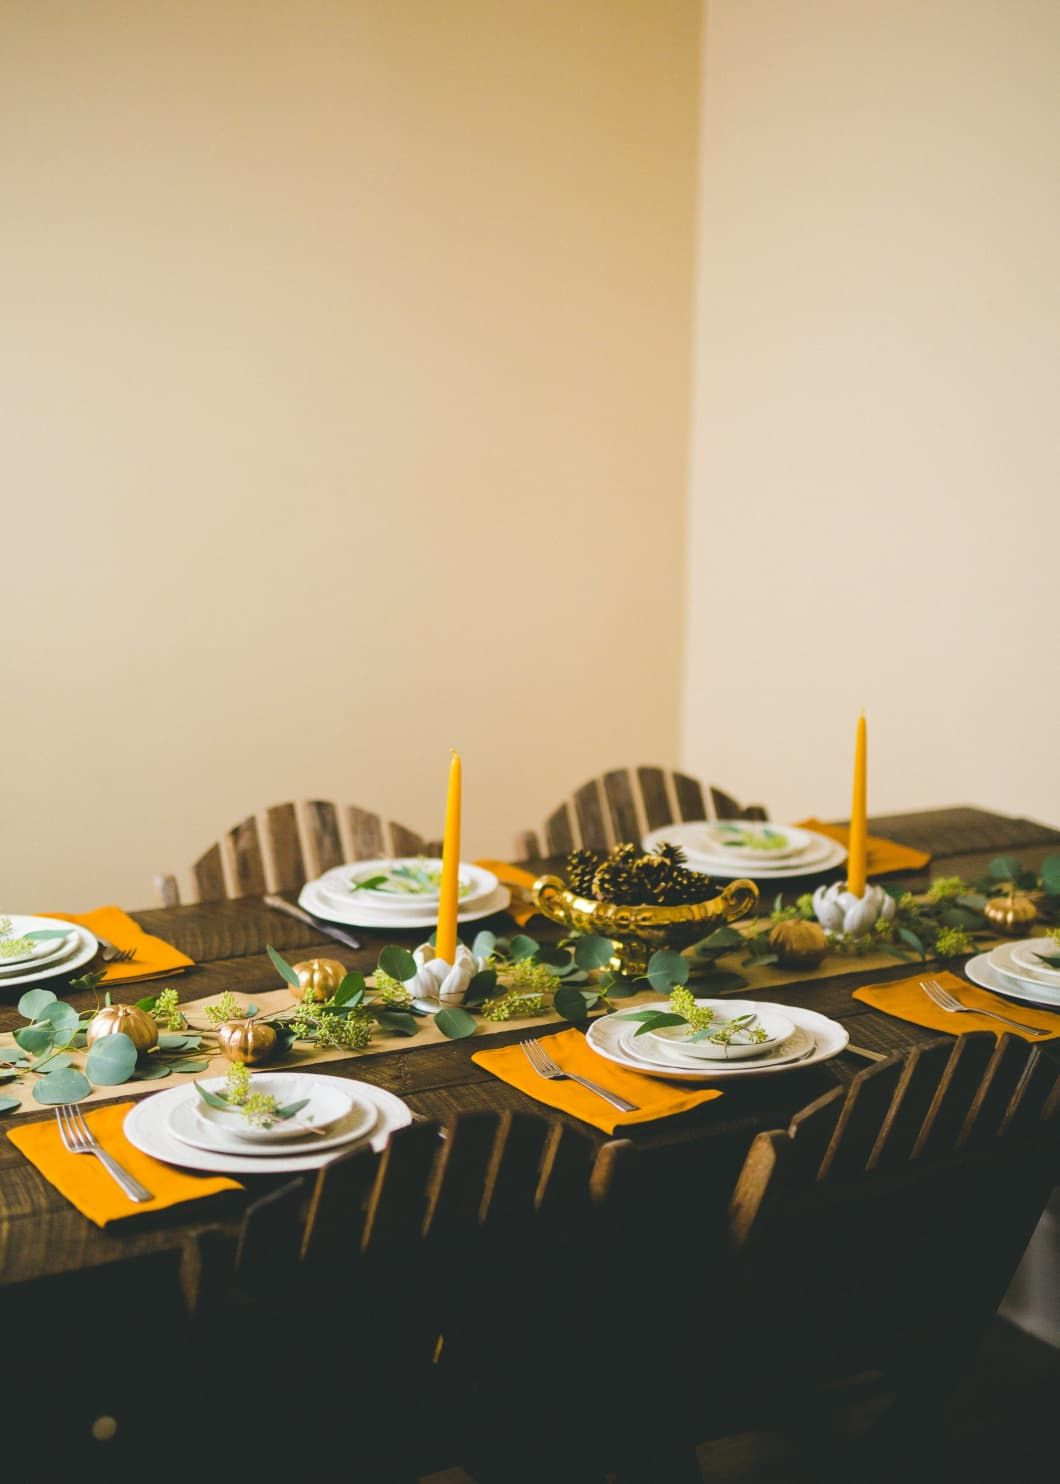 Dinner Party Decorating Ideas On A Budget
 Here’s How to Set a Beautiful Thanksgiving Table on a